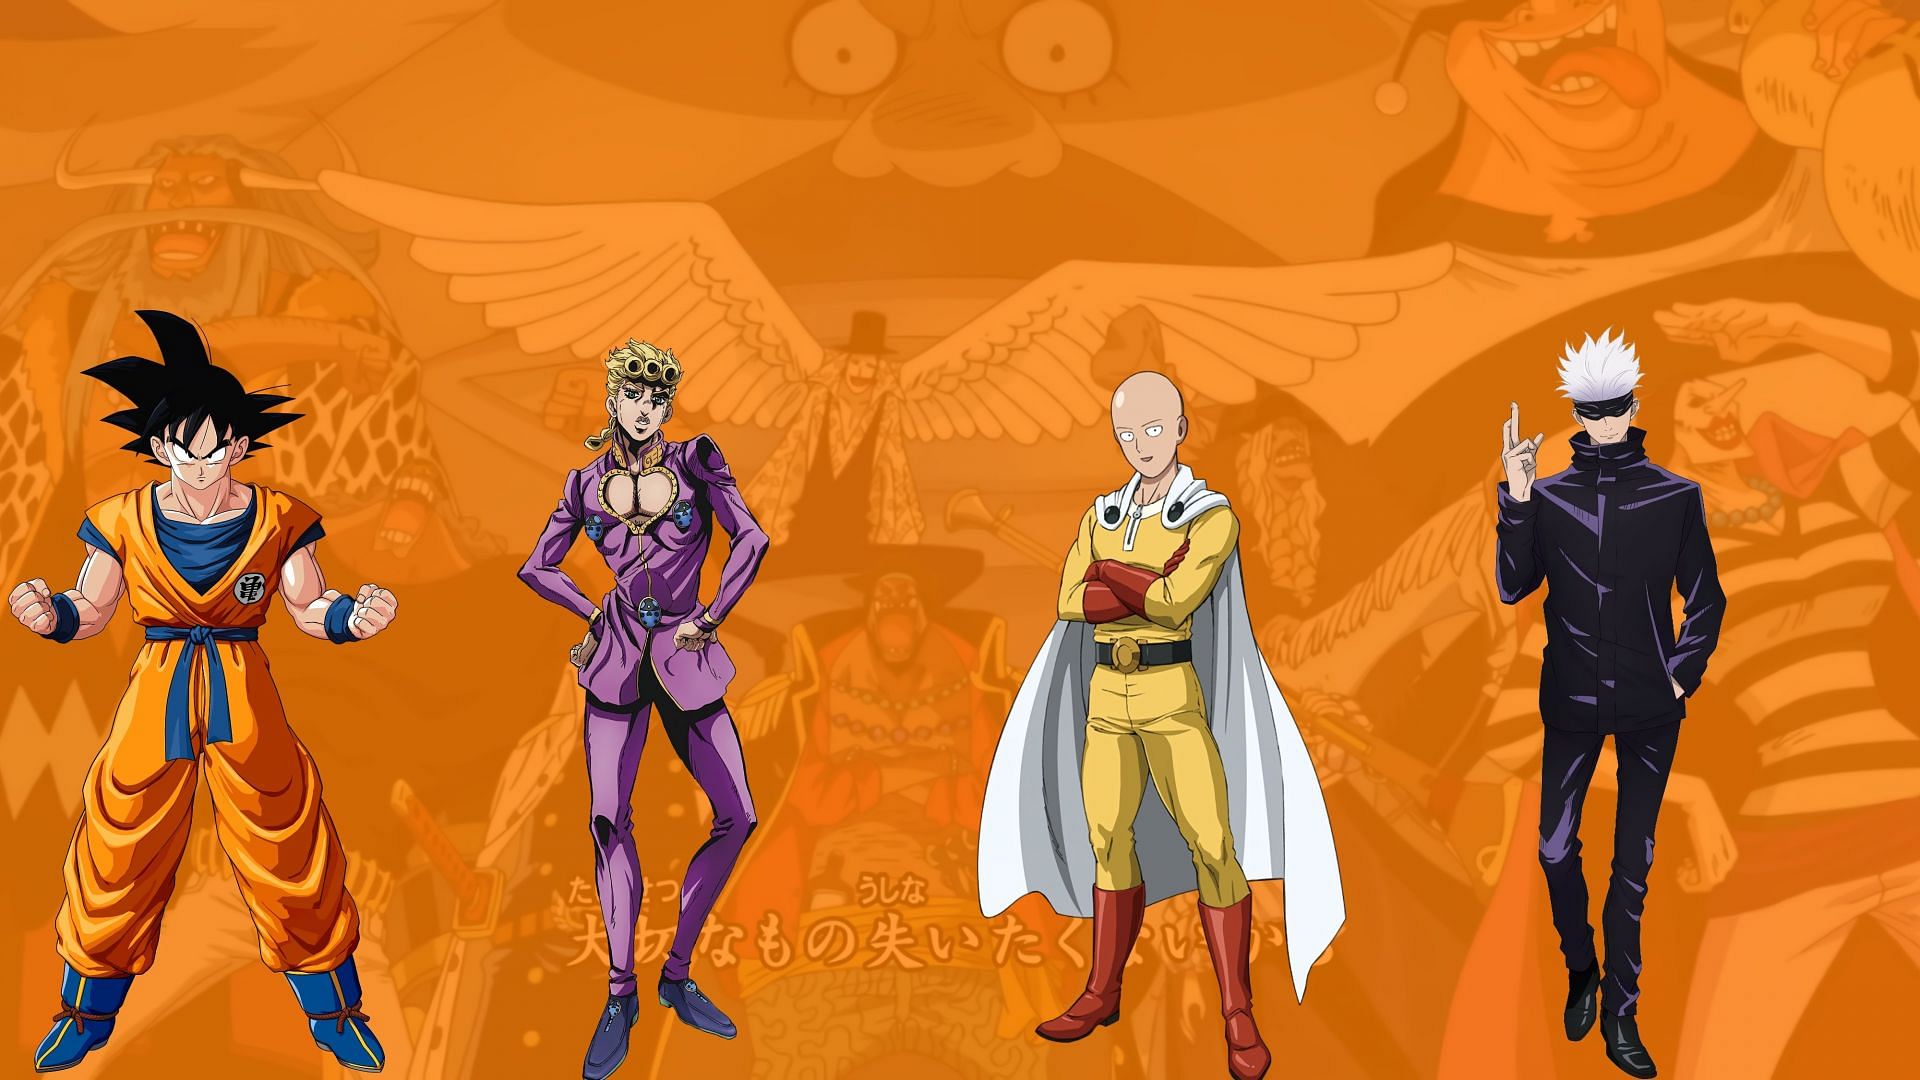 These warriors are ready to fight One Piece